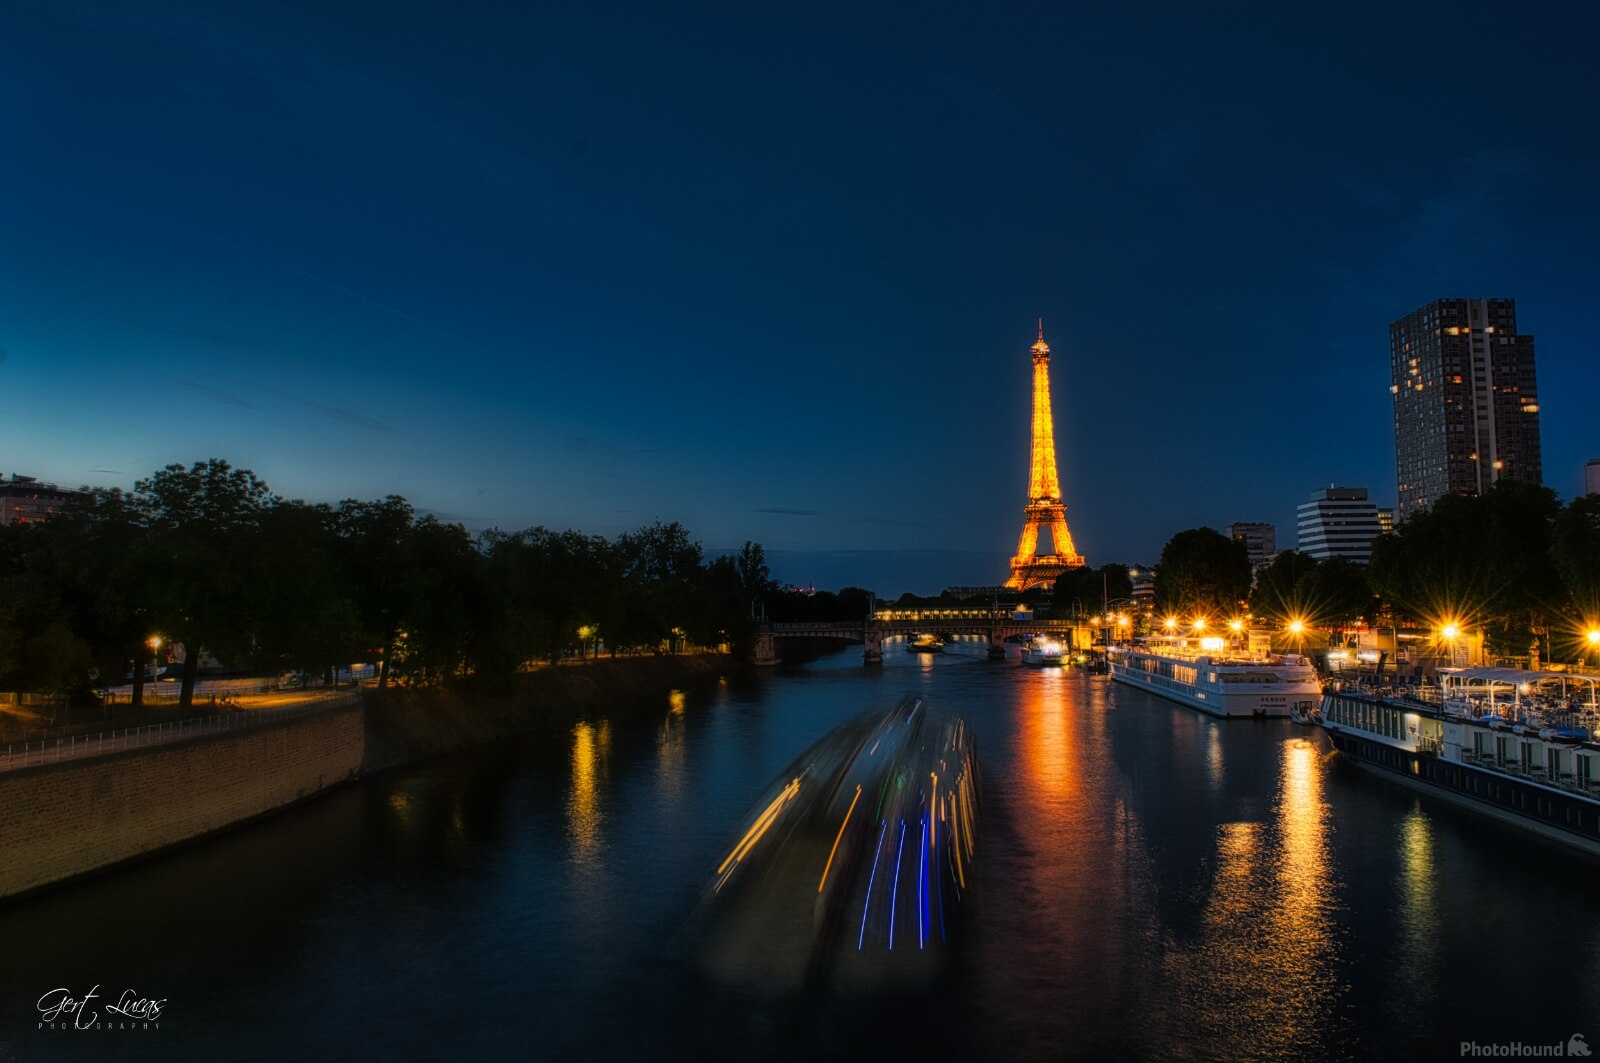 Image of Eiffel Tower from Pont de Grenelle by Gert Lucas